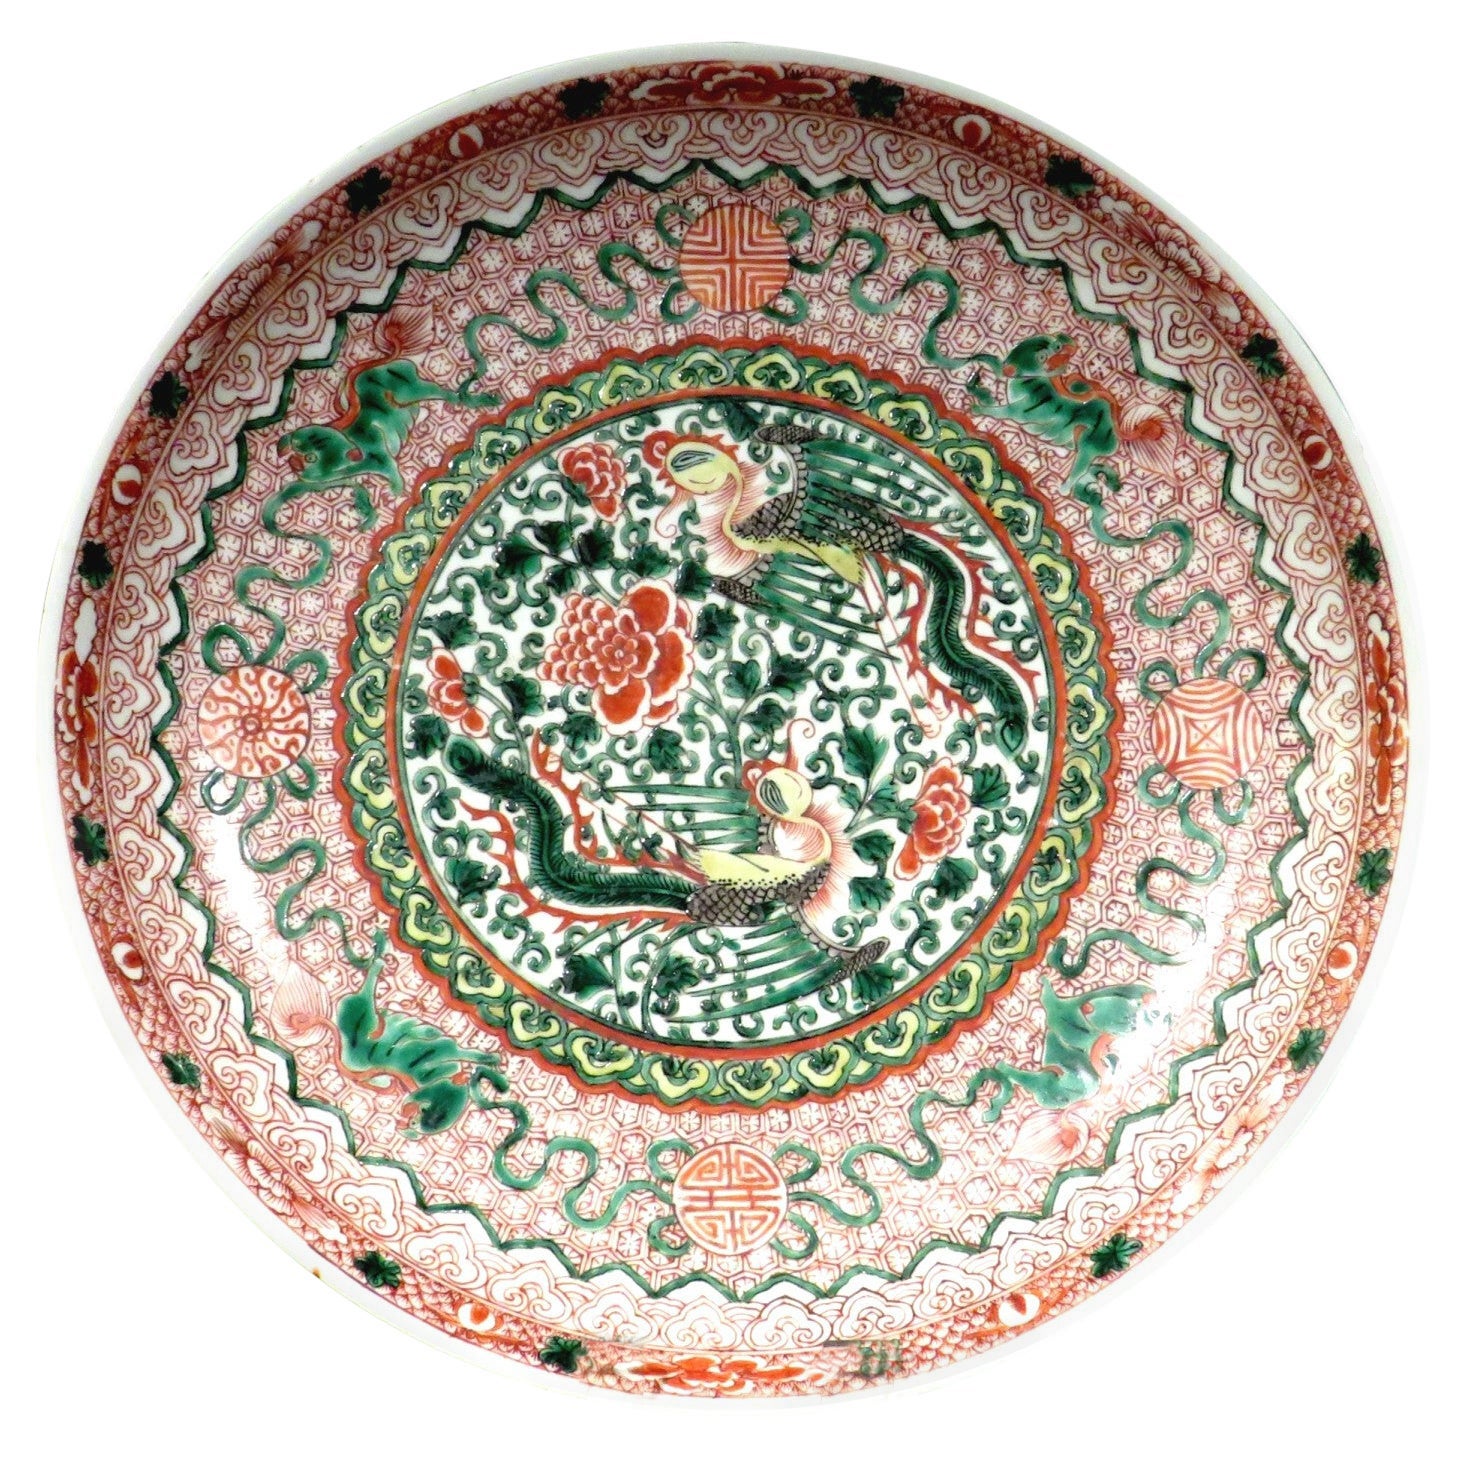 A Chinese Famille Verte Enameled Porcelain Charger, Kangxi Period (1662-1722)